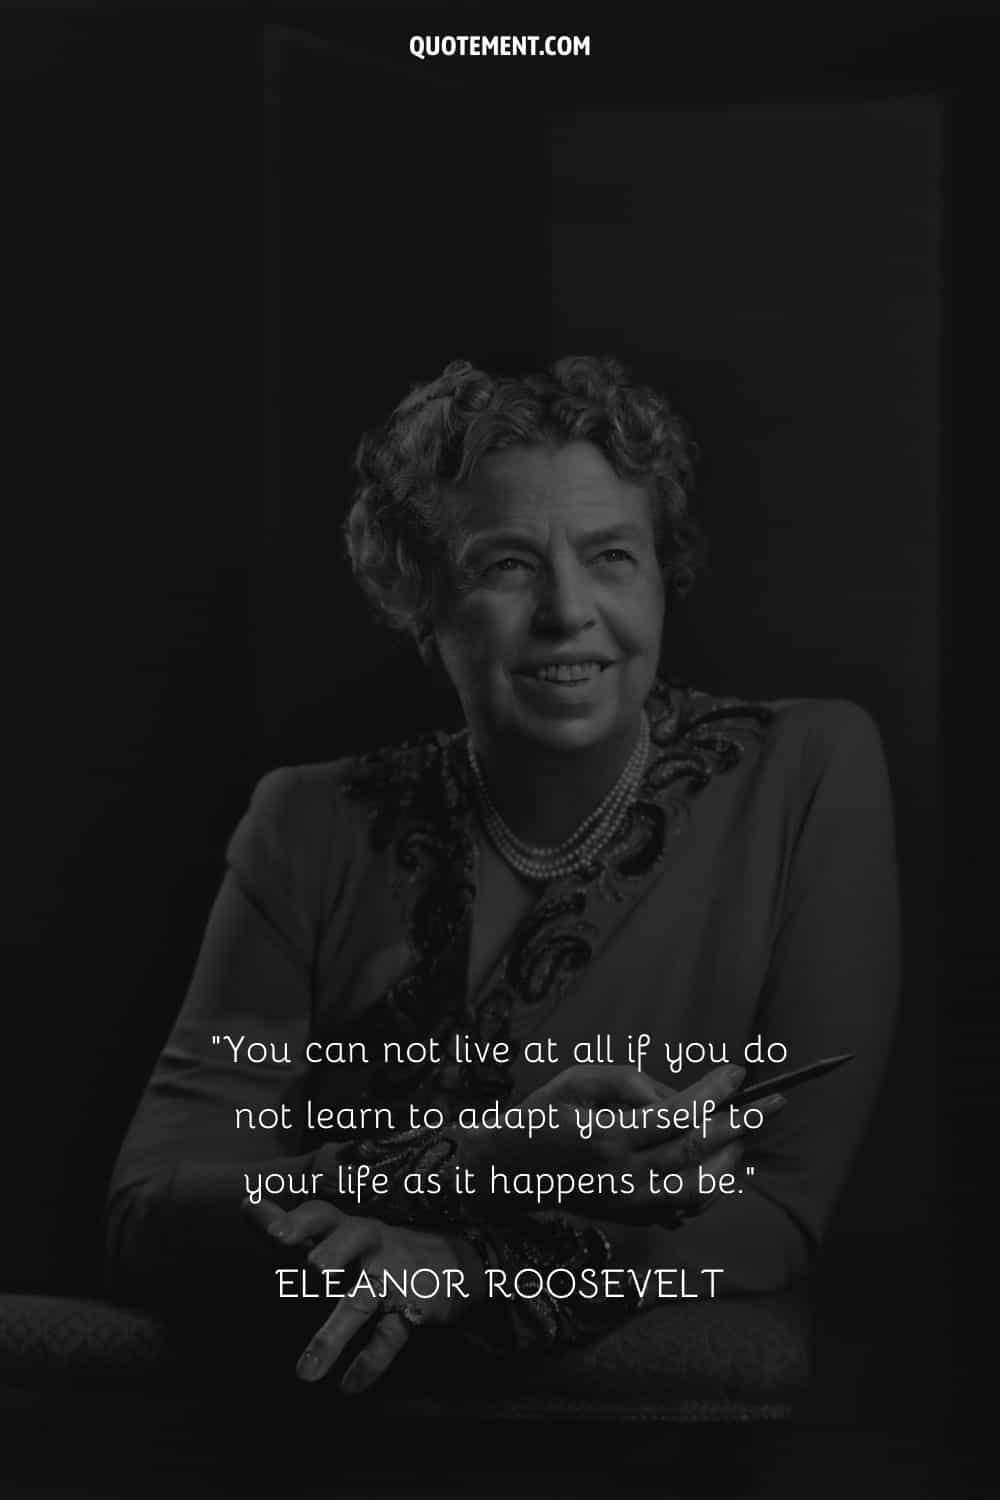 “You can not live at all if you do not learn to adapt yourself to your life as it happens to be.” — Eleanor Roosevelt